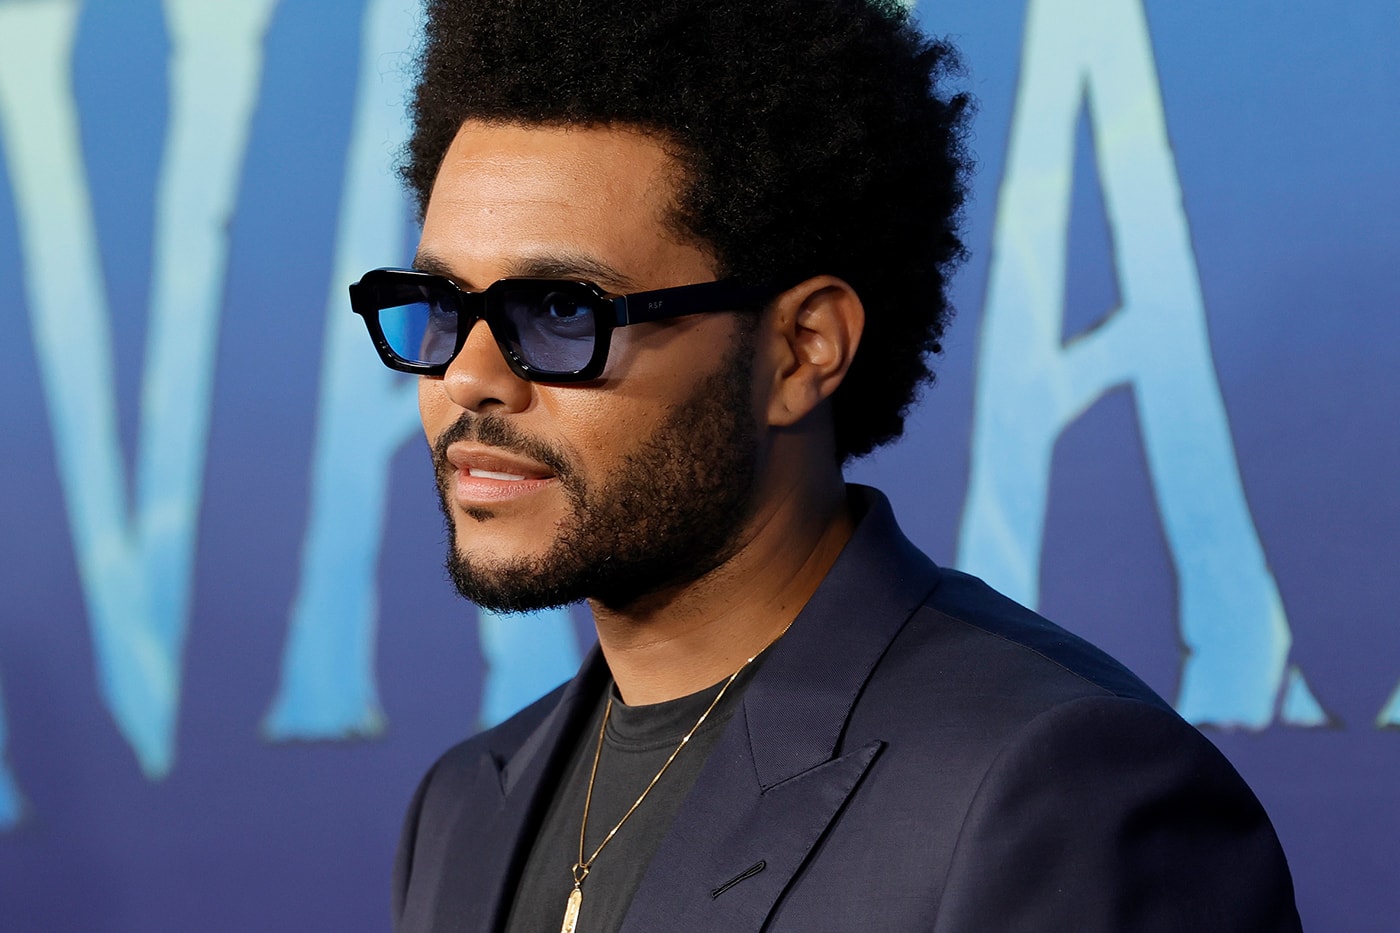 The Weeknd Teases Surprise Coachella Appearance Tweet cryptic desert los angeles palm springs festival canadian singer crooner 